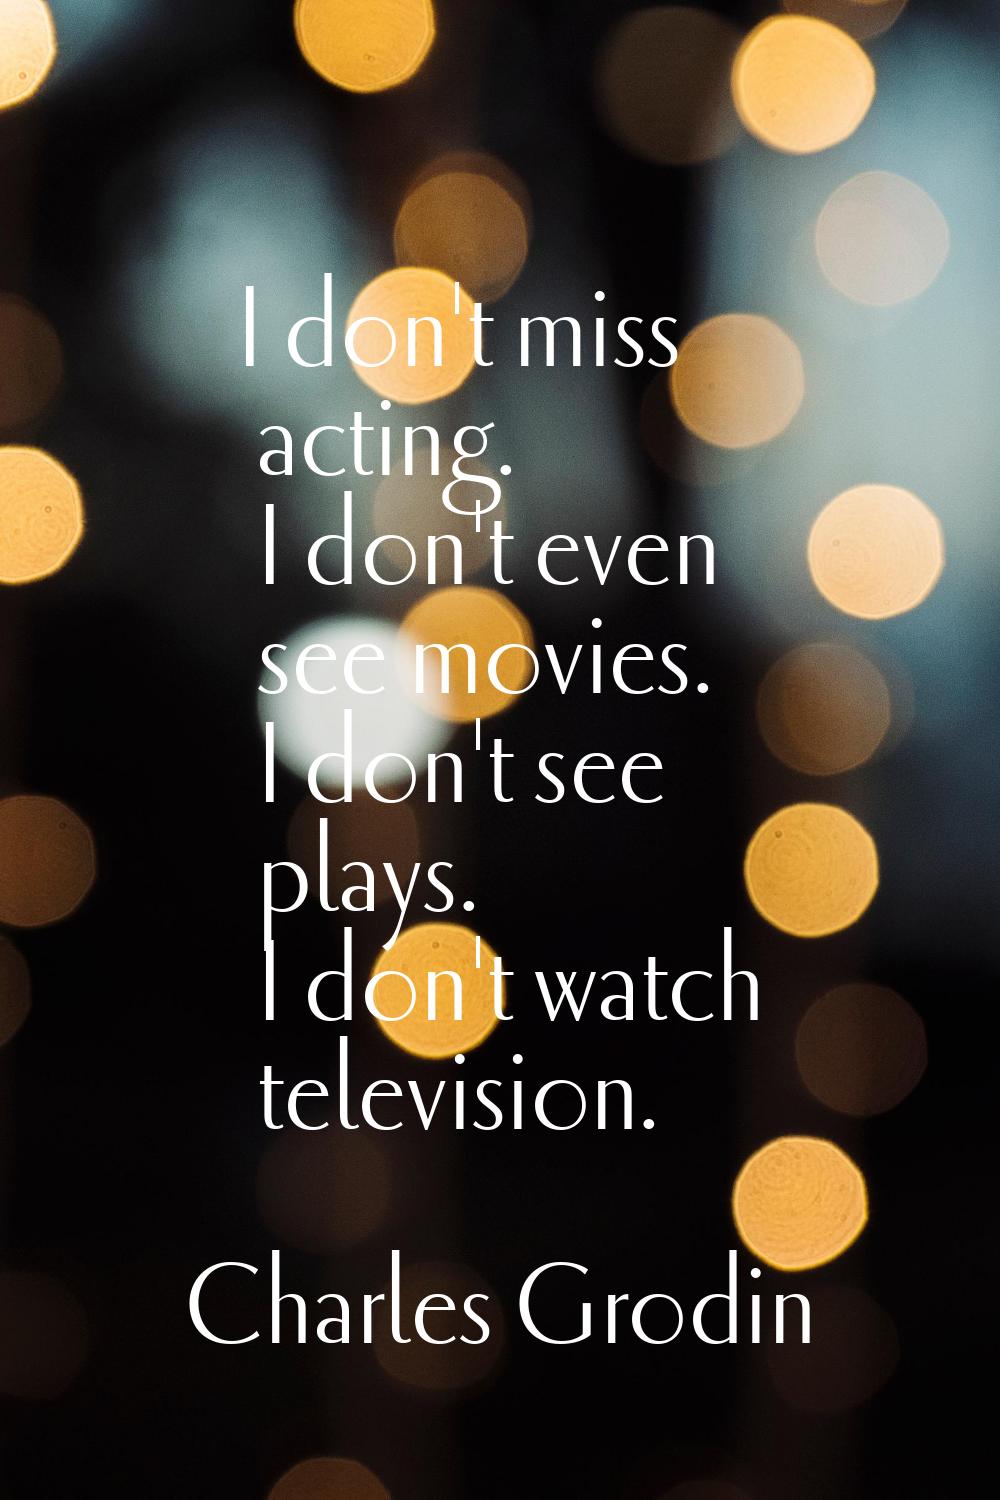 I don't miss acting. I don't even see movies. I don't see plays. I don't watch television.